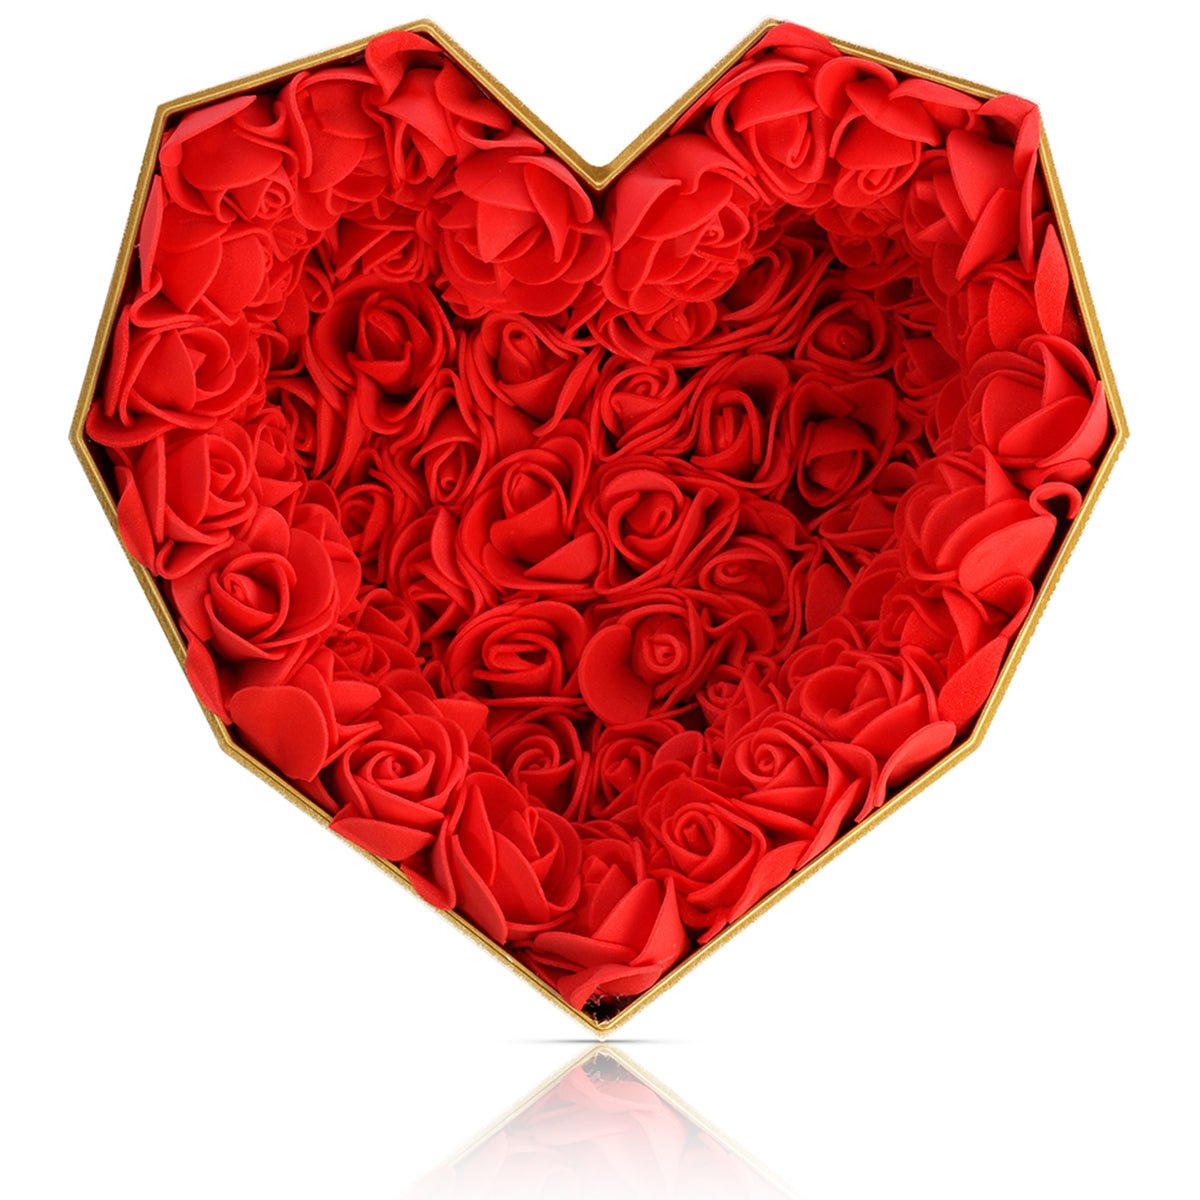 Red roses in a heart